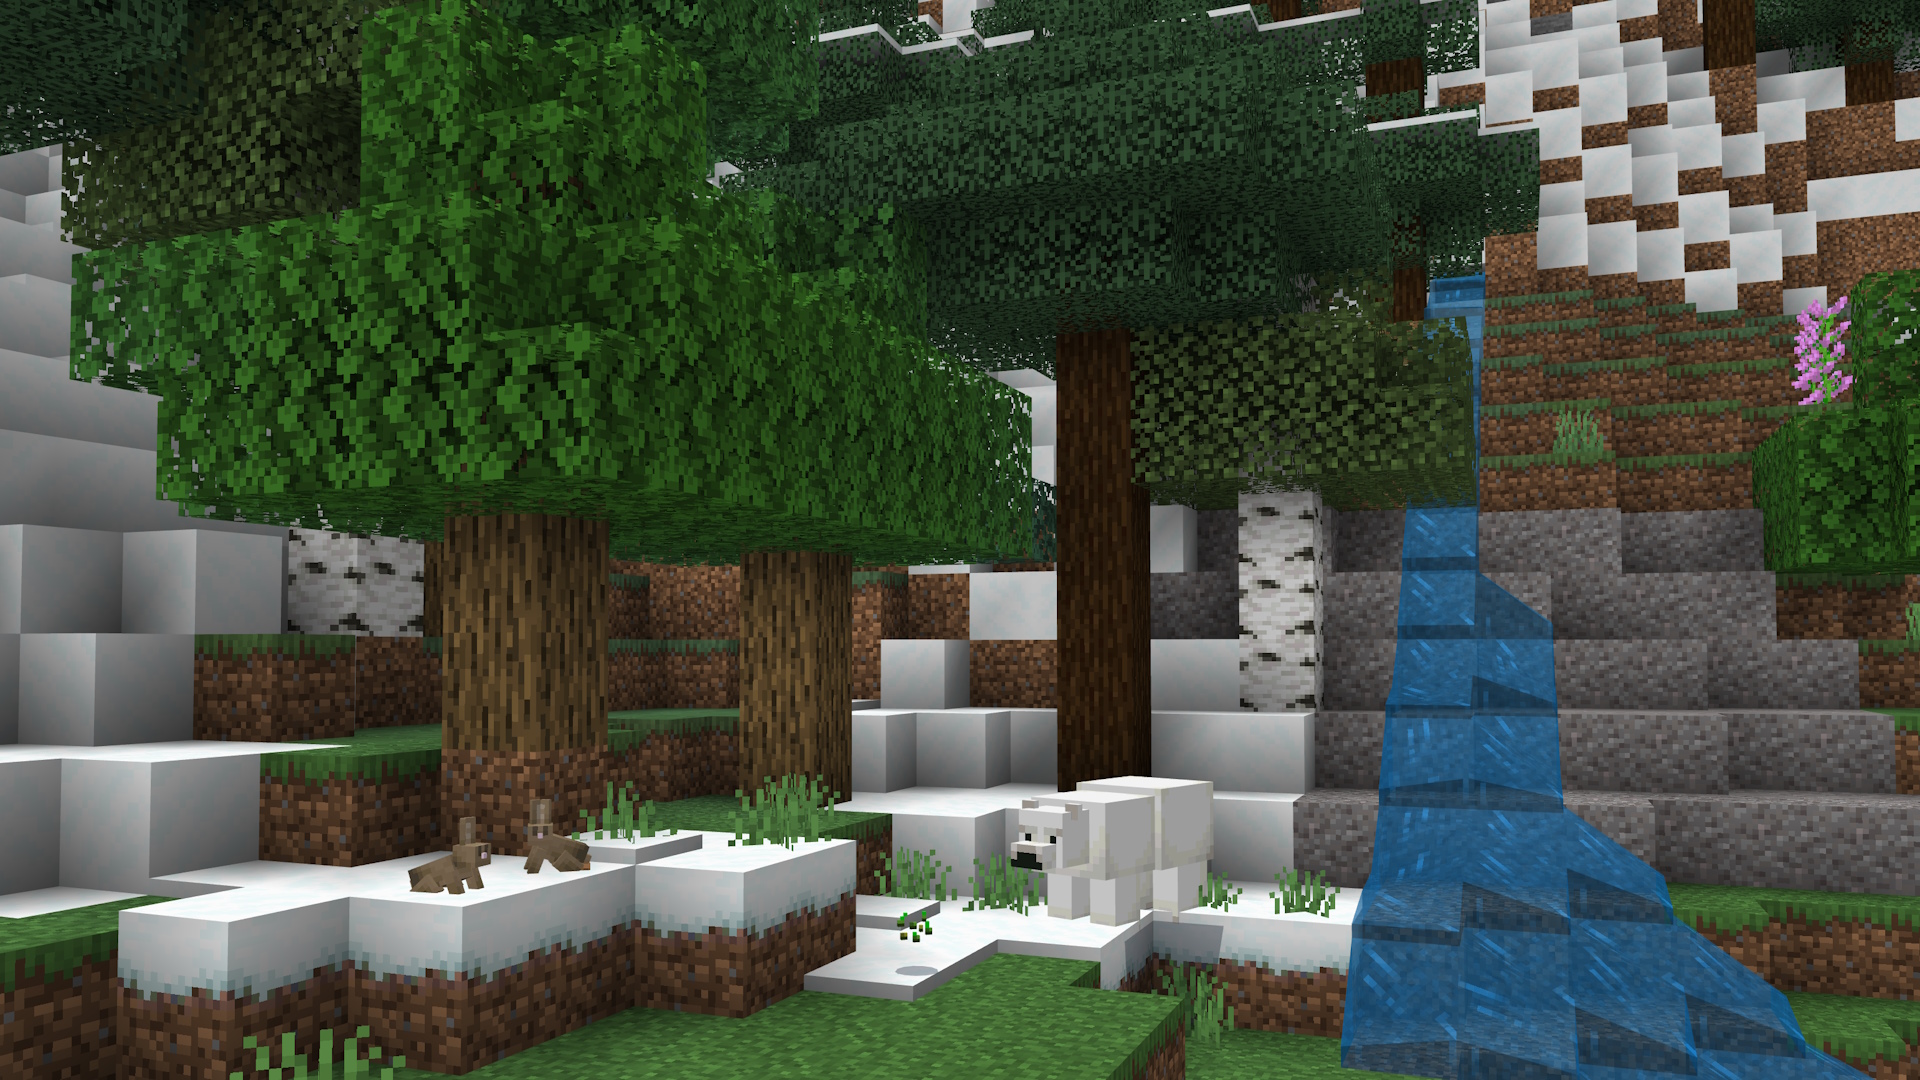 A Minecraft screenshot of some rabbits and a polar bear standing on some snow layers, with trees and a waterfall nearby.